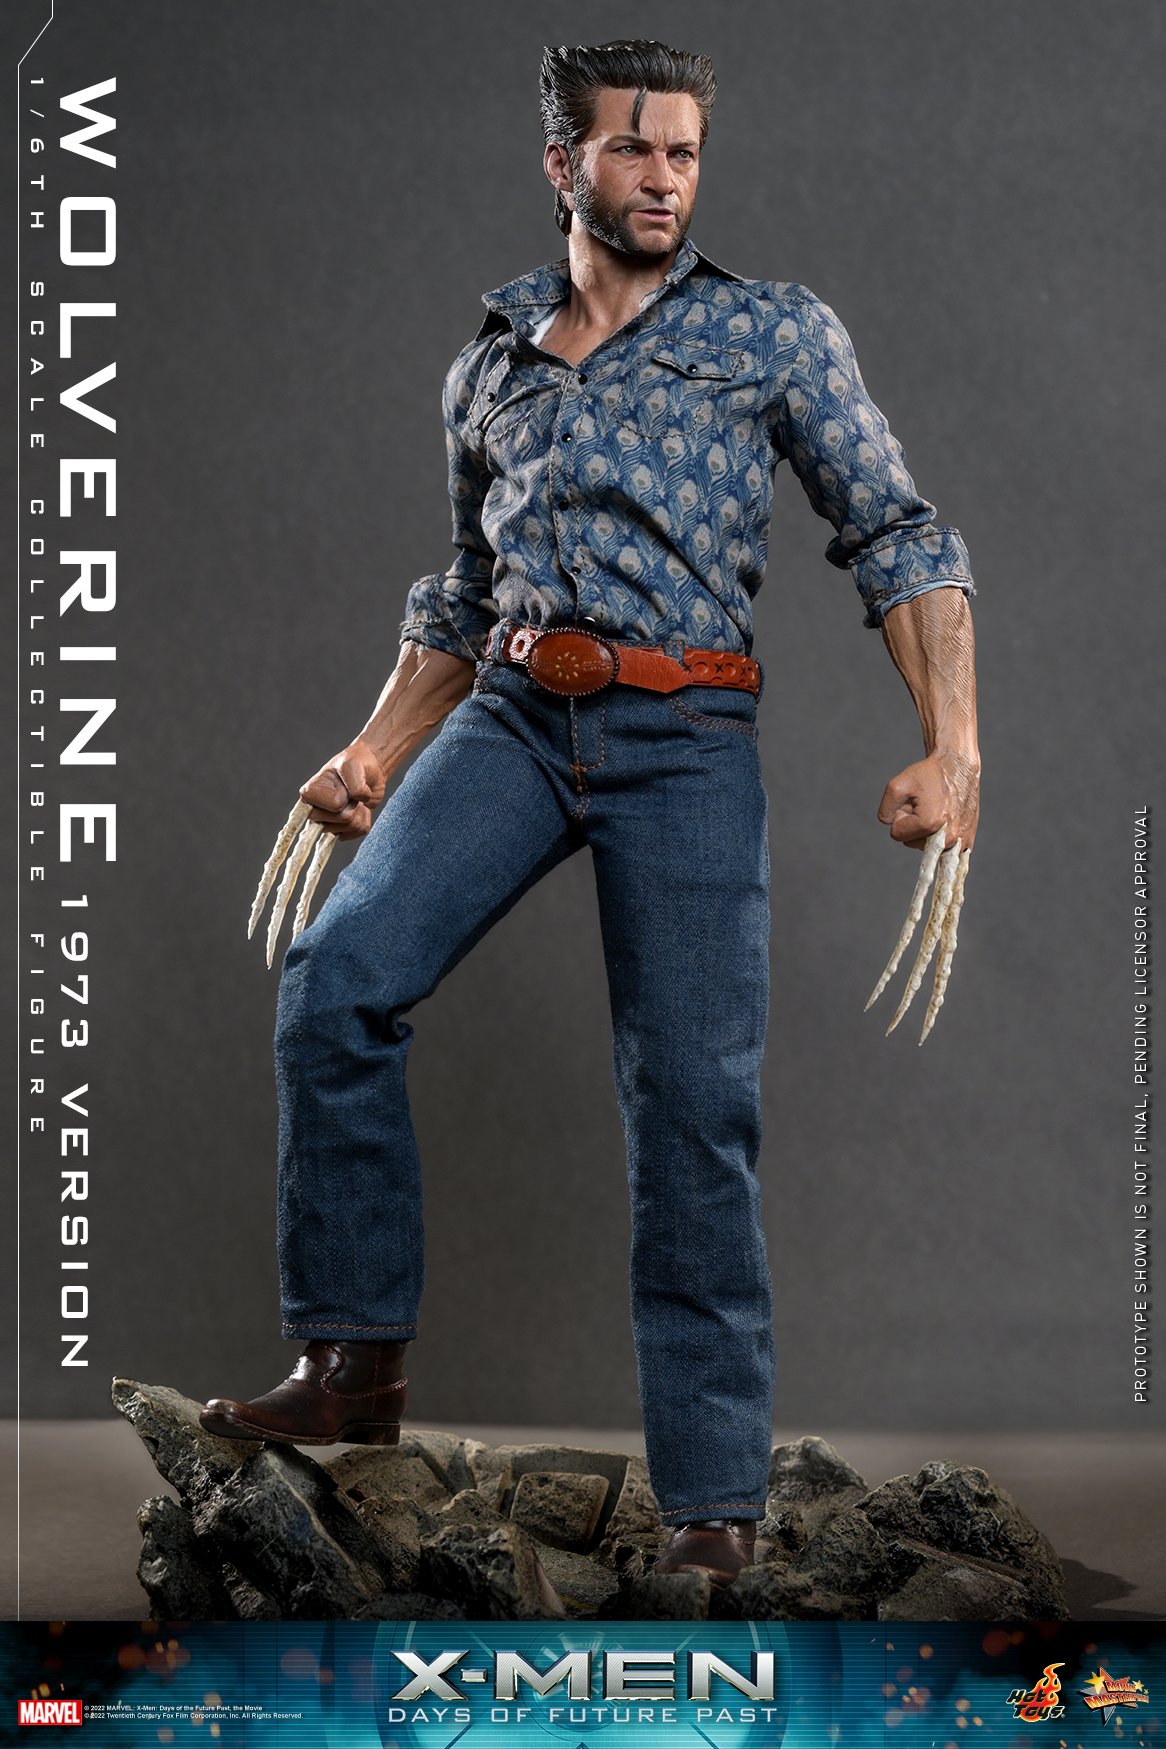 Pre-Order Hot Toys Marvel Wolverine X-Men Days of Future Past Figure